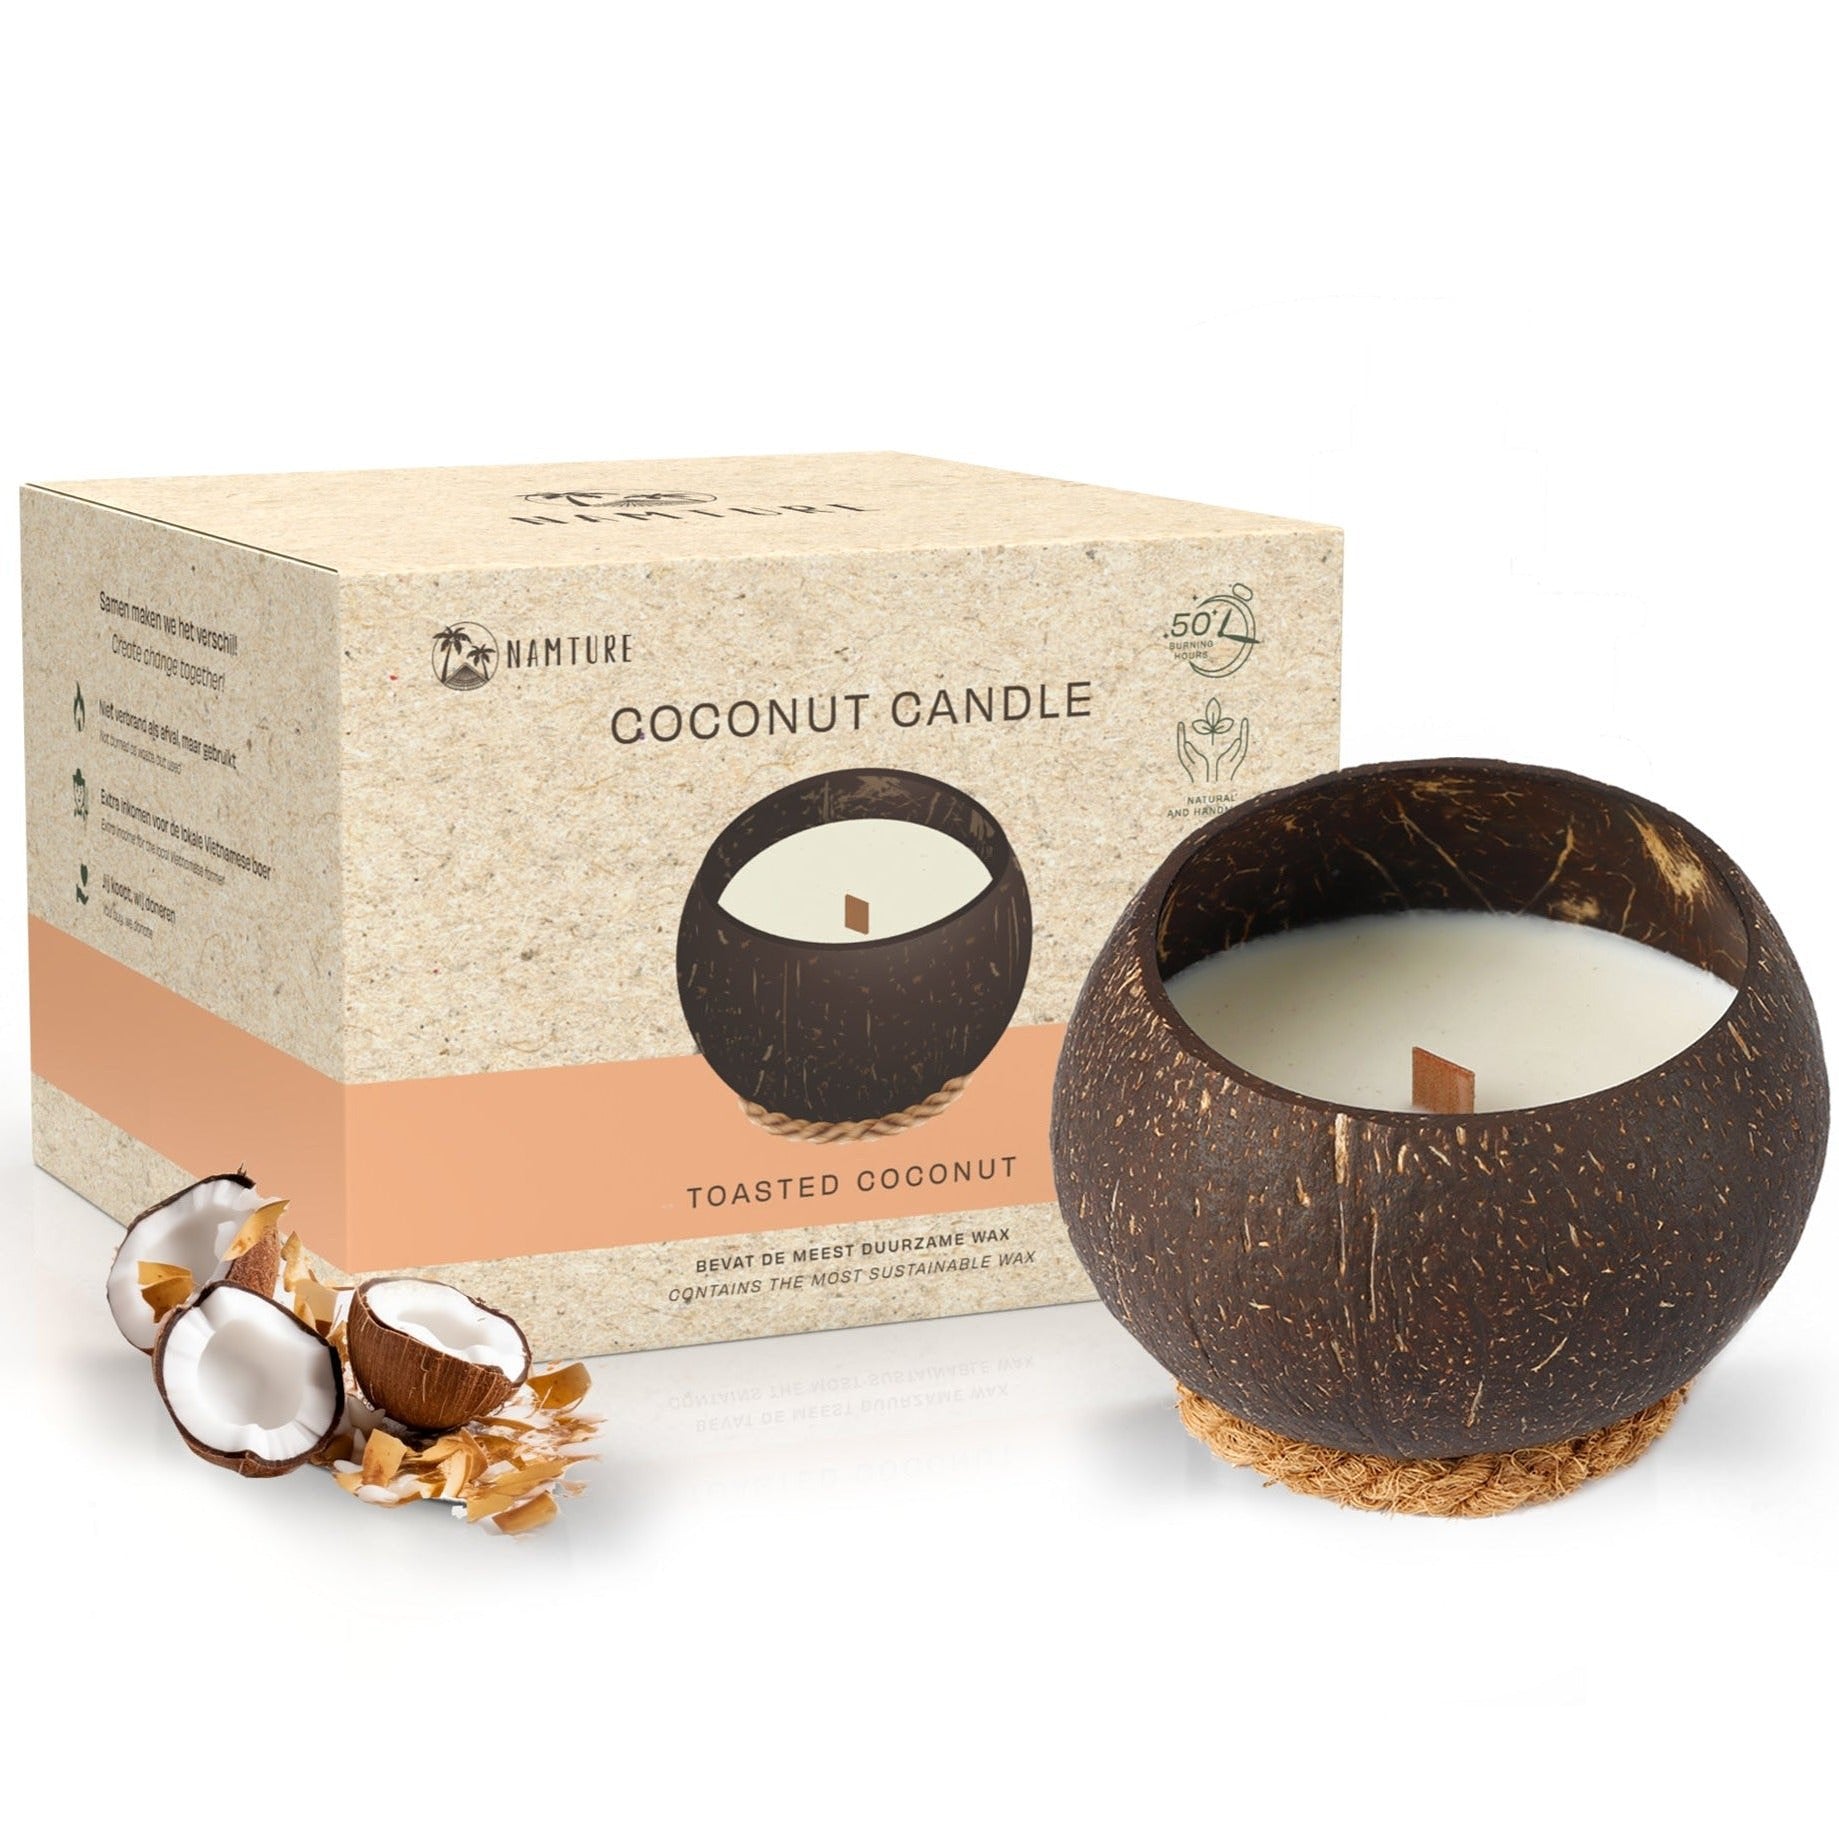 NAMTURE Coconut candle Toasted Coconut 2 pack